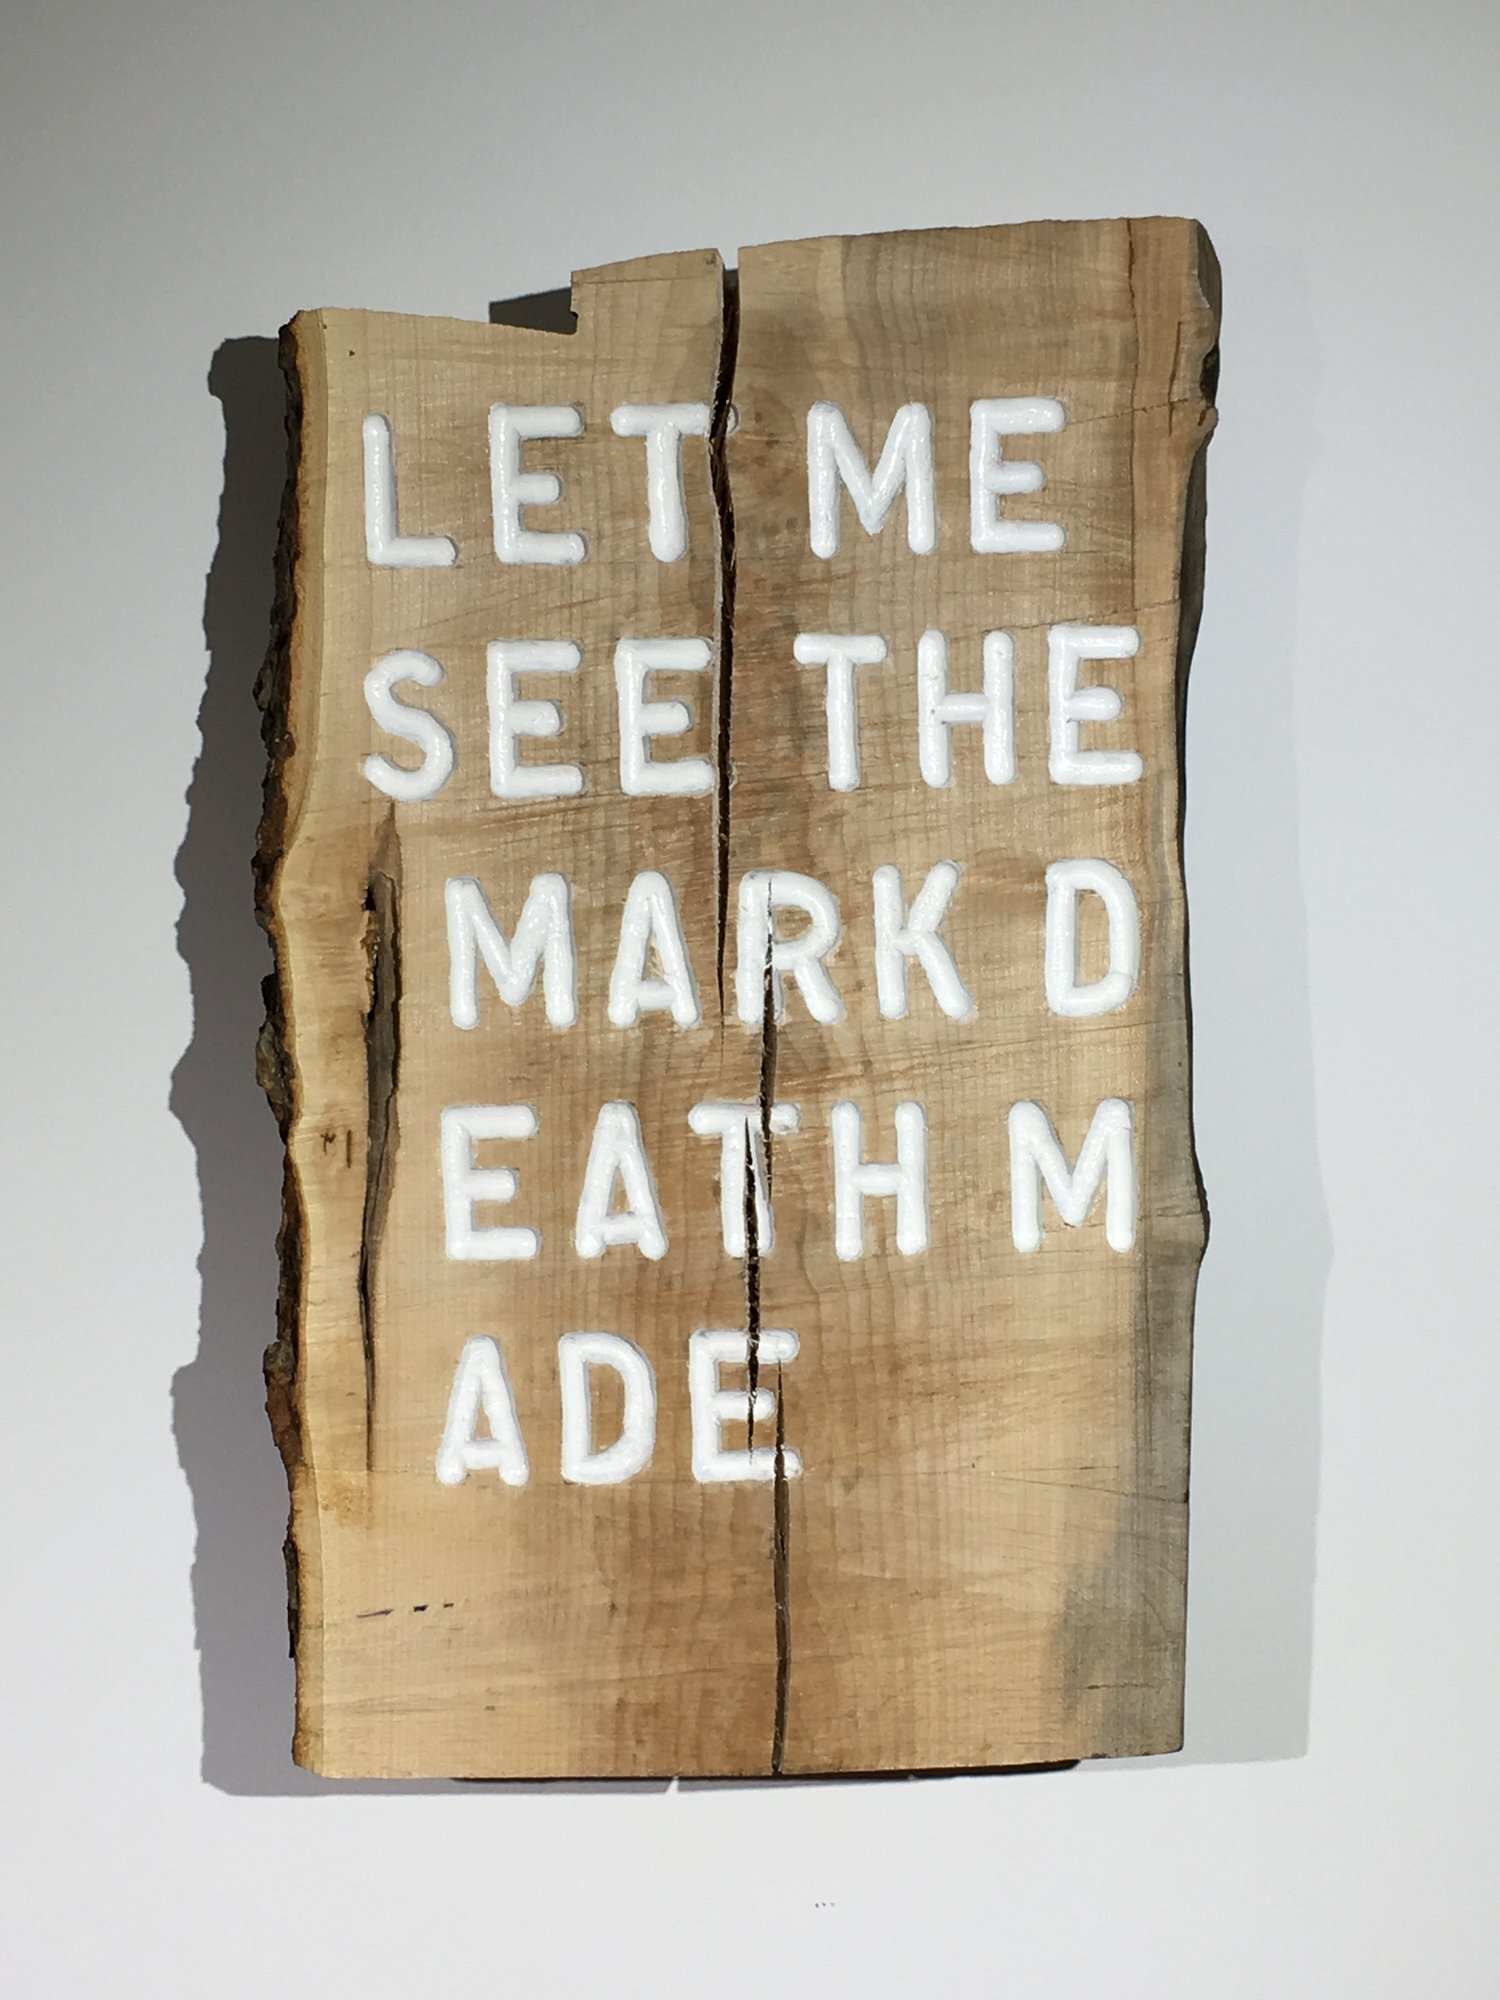 Let Me See The Mark Dearh Made, 2017